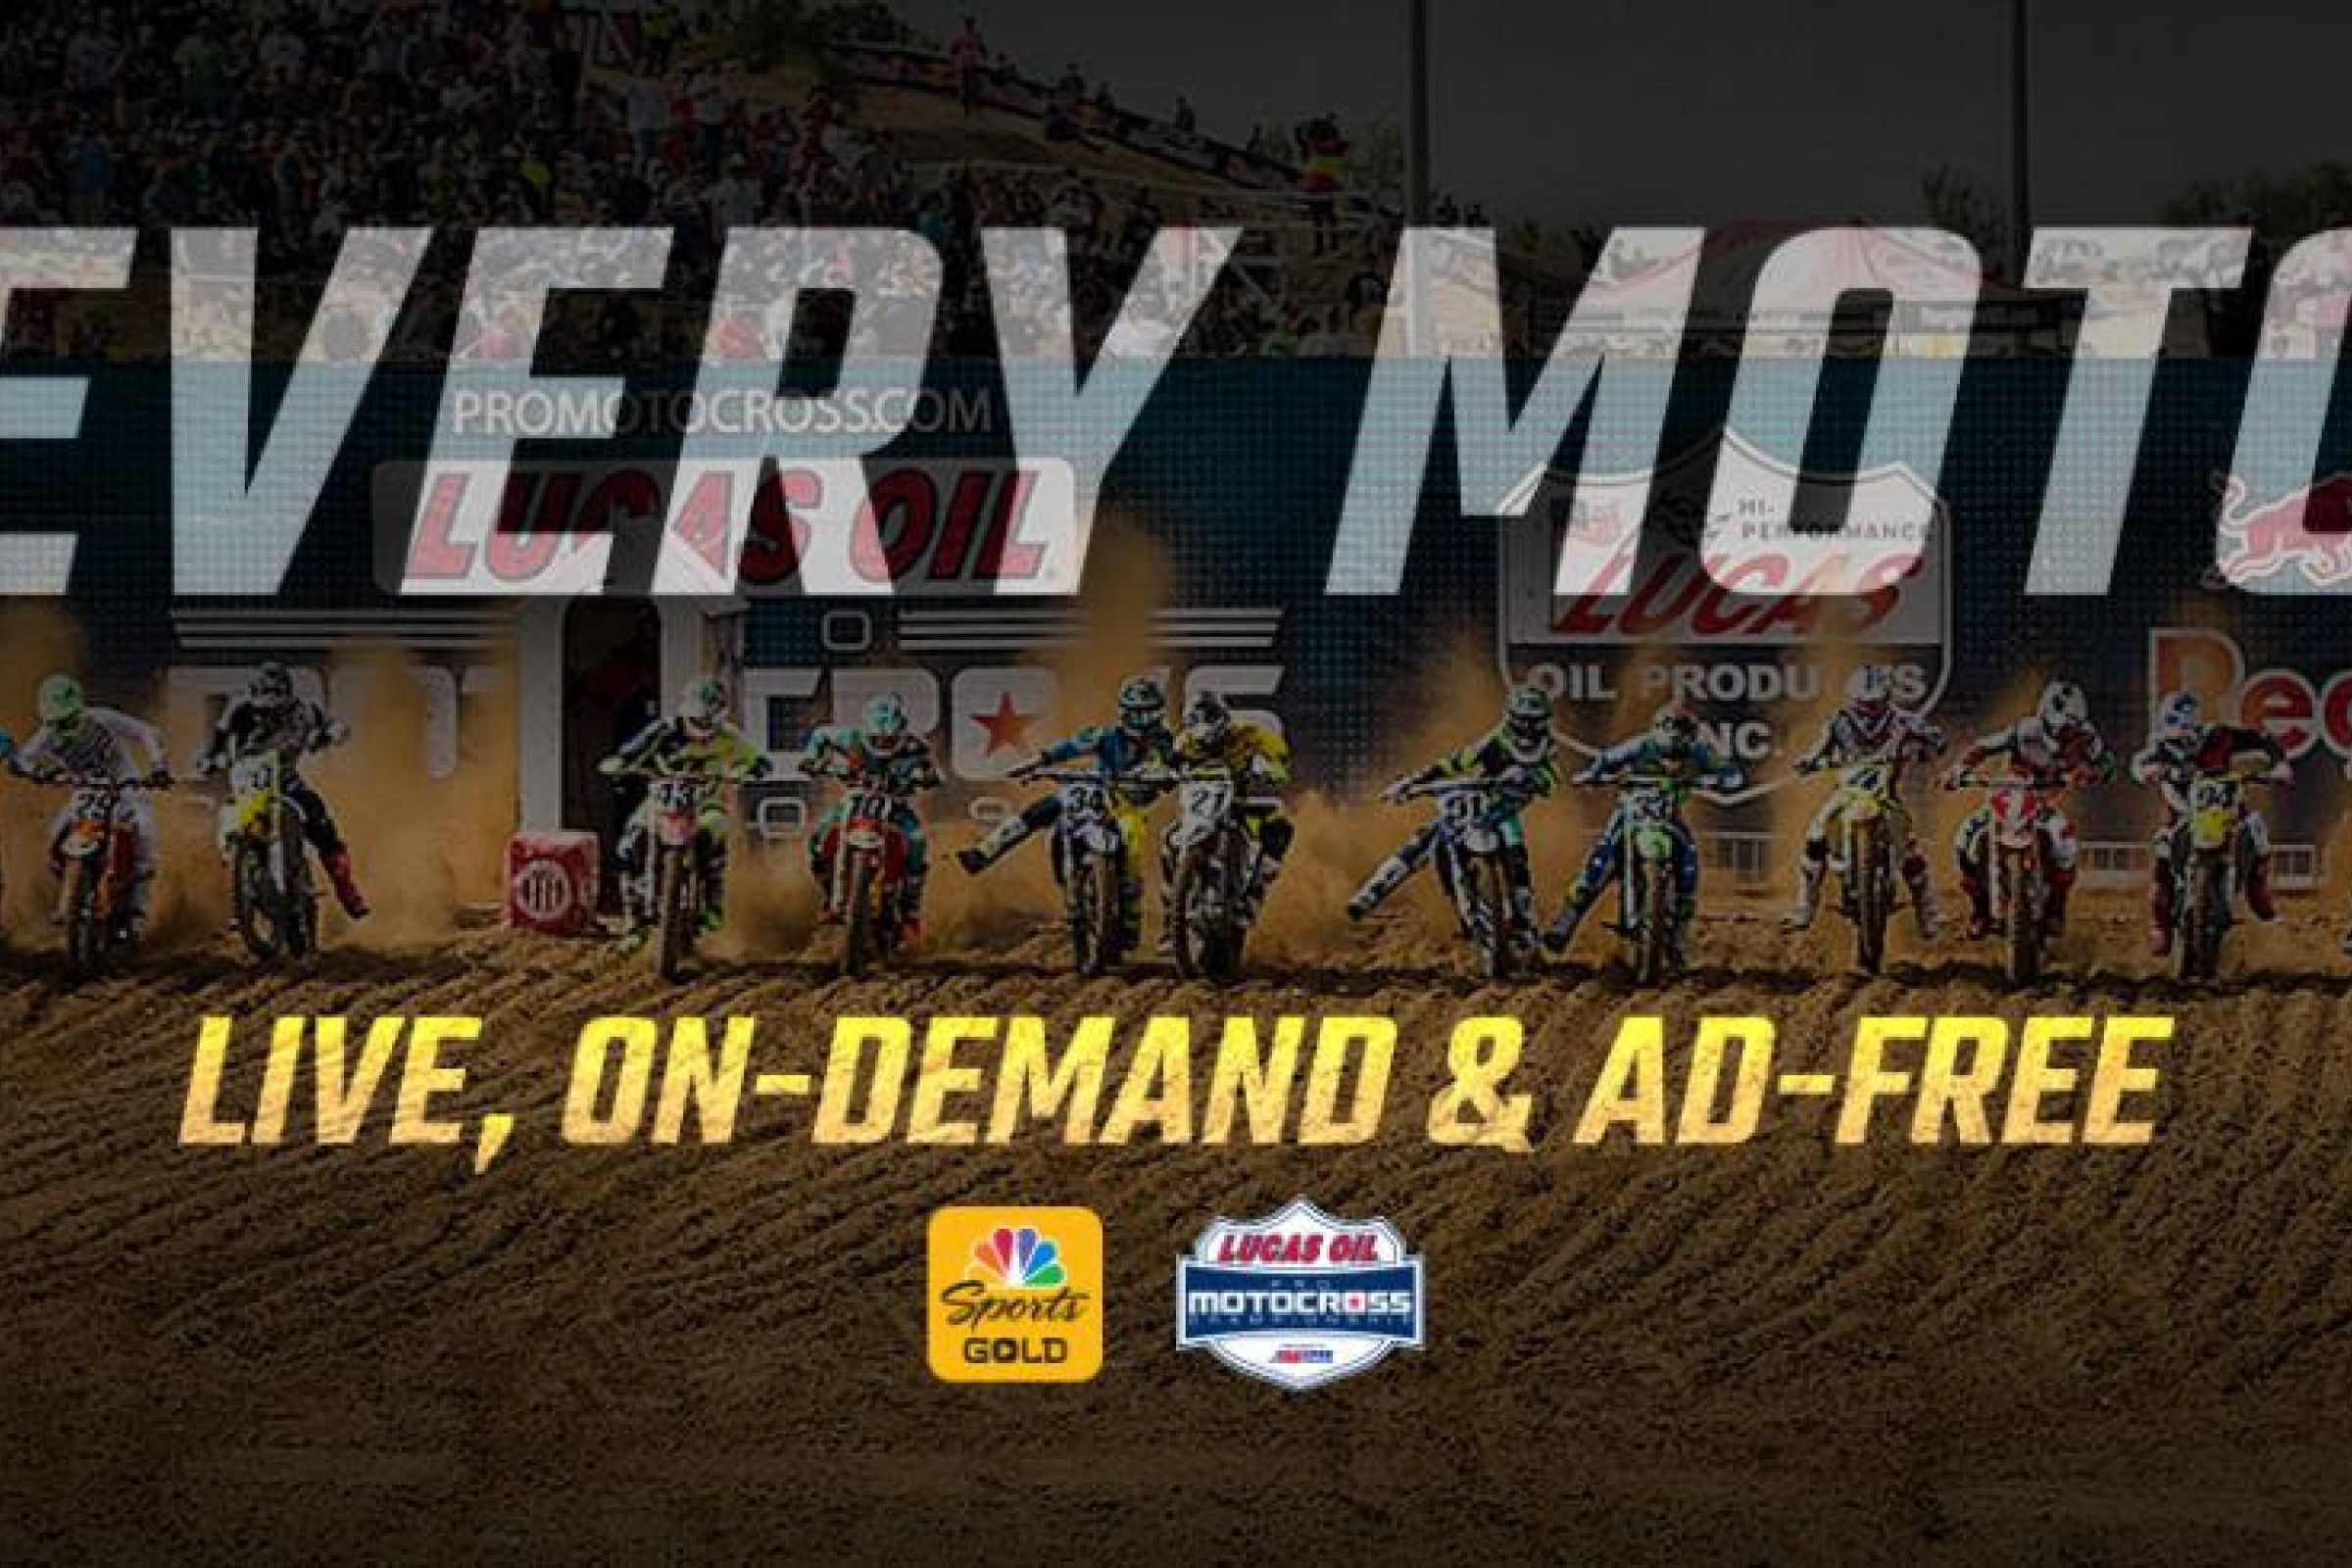 Direct-To-Consumer Live Streaming Coming to Pro Motocross with NBC Sports Gold